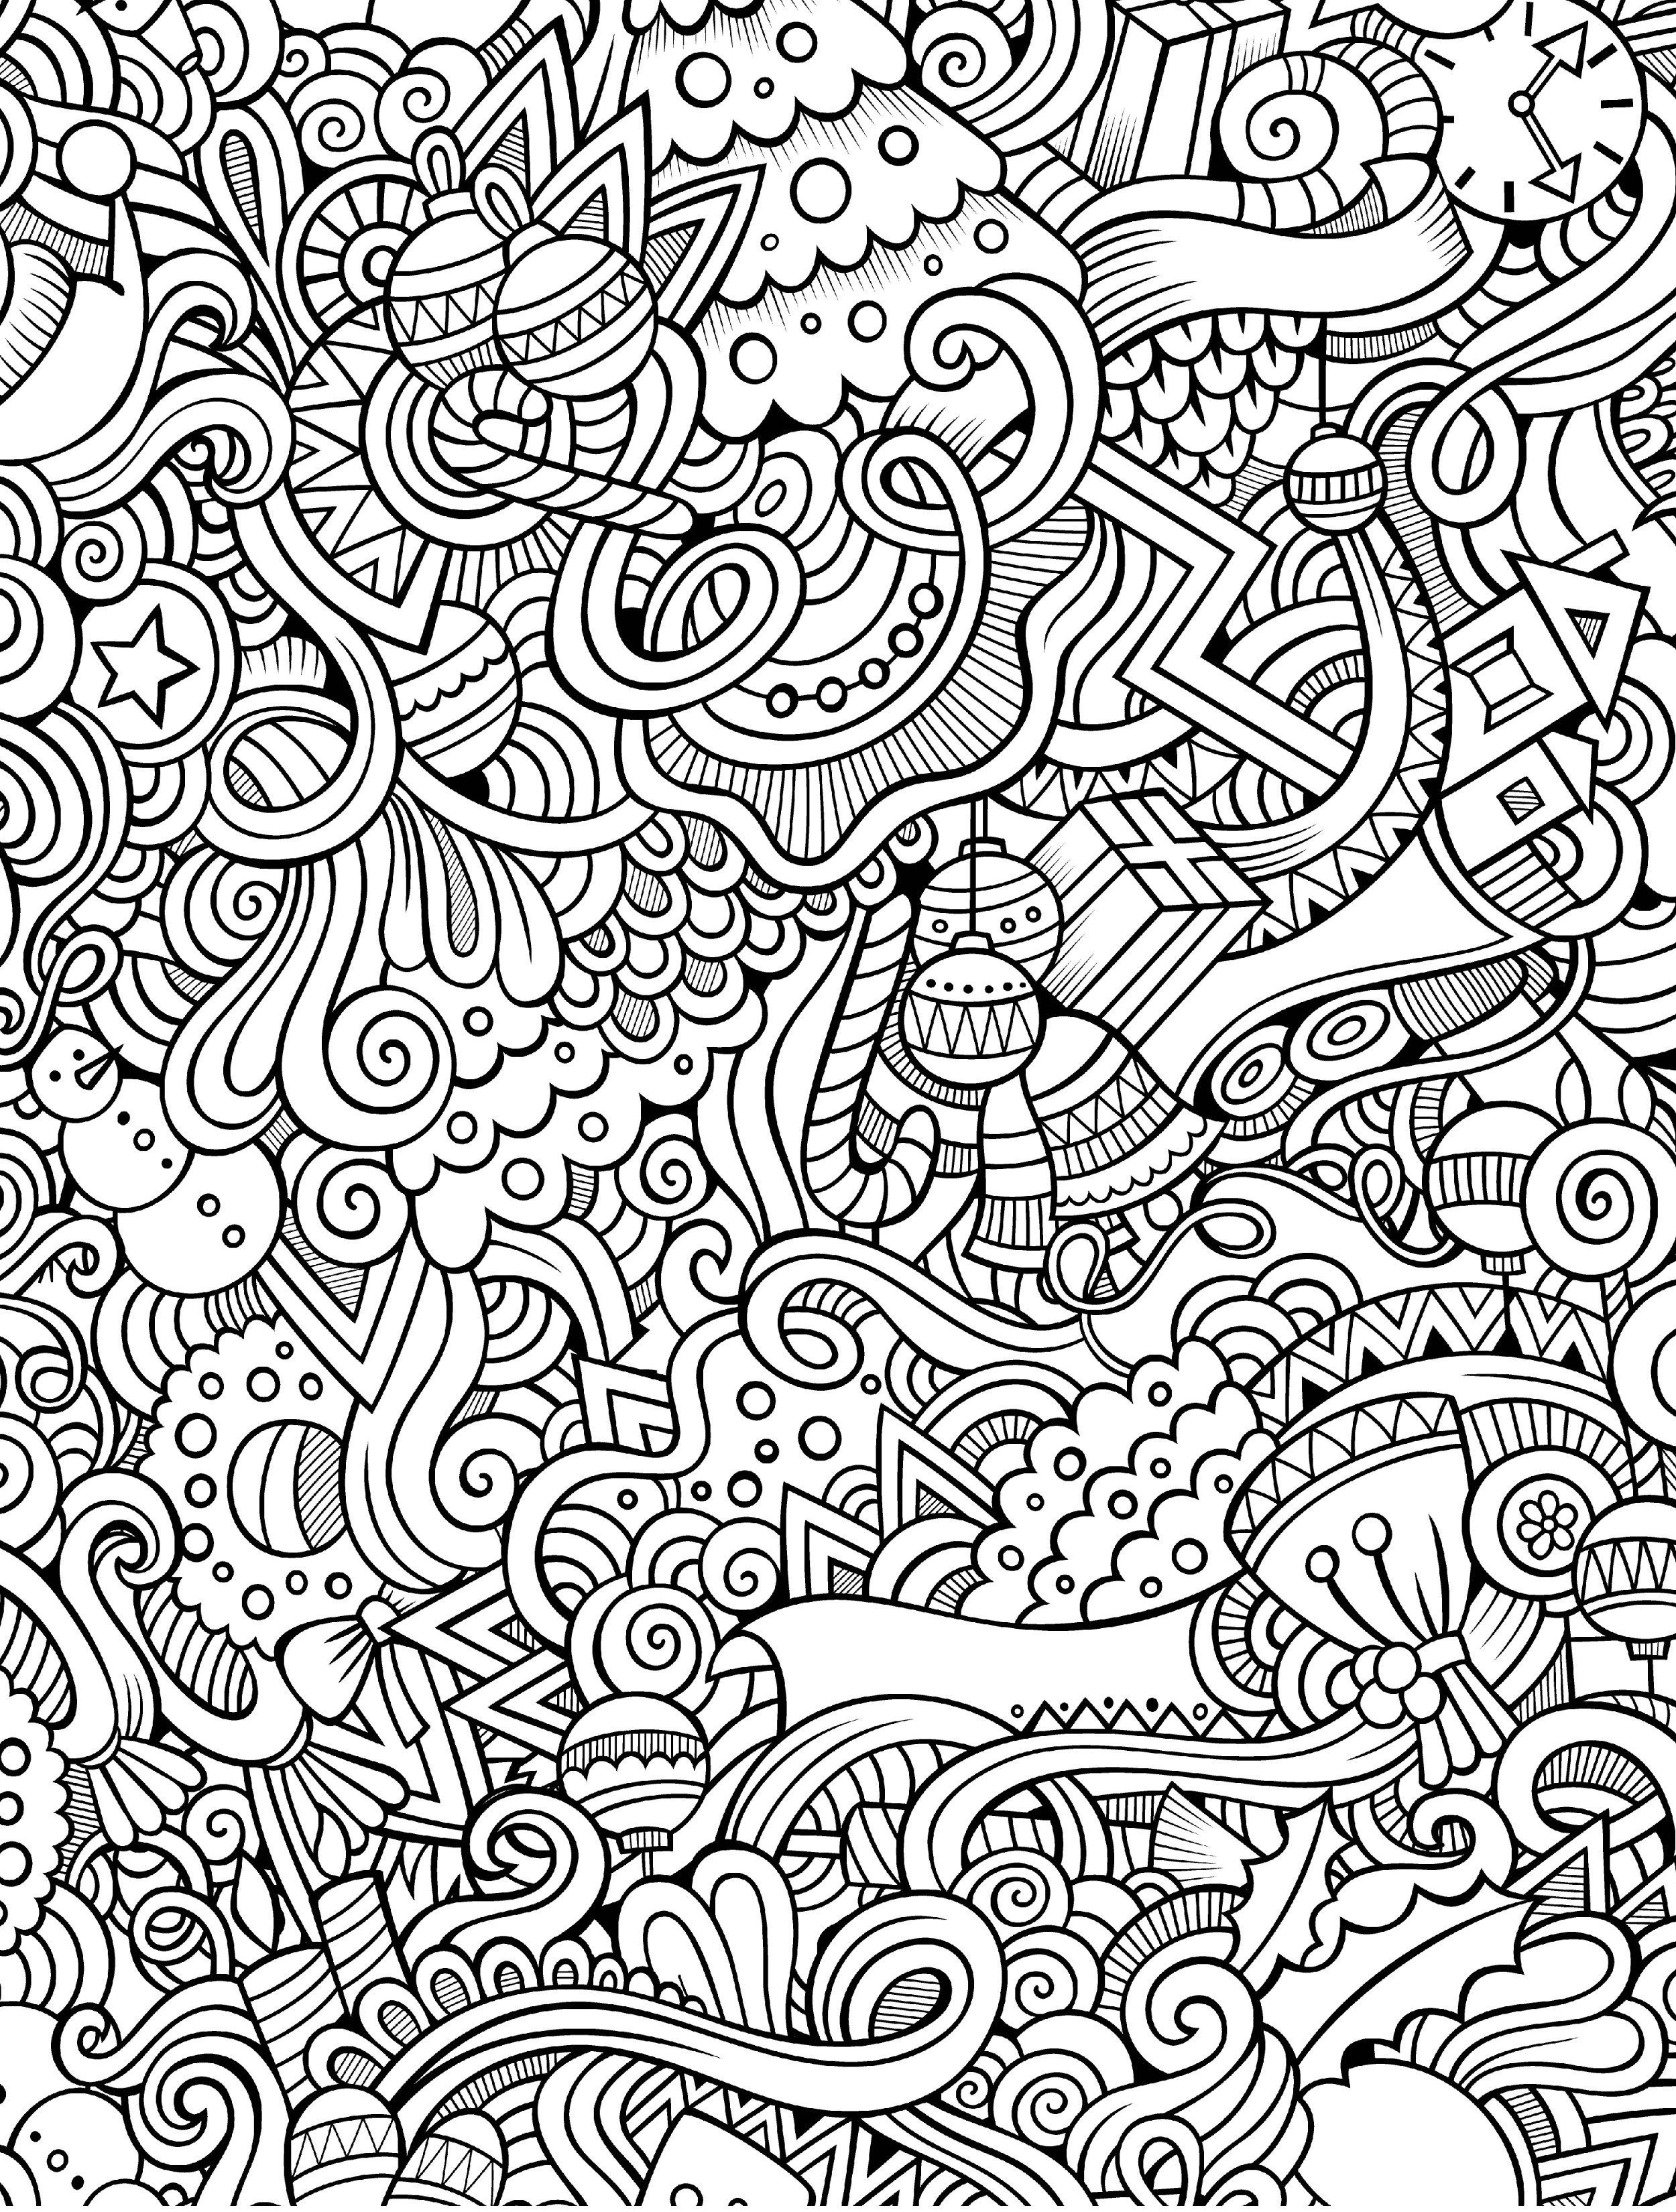 10 Free Printable Holiday Adult Coloring Pages | Coloring Pages - Free Printable Coloring Pages For Adults Pdf